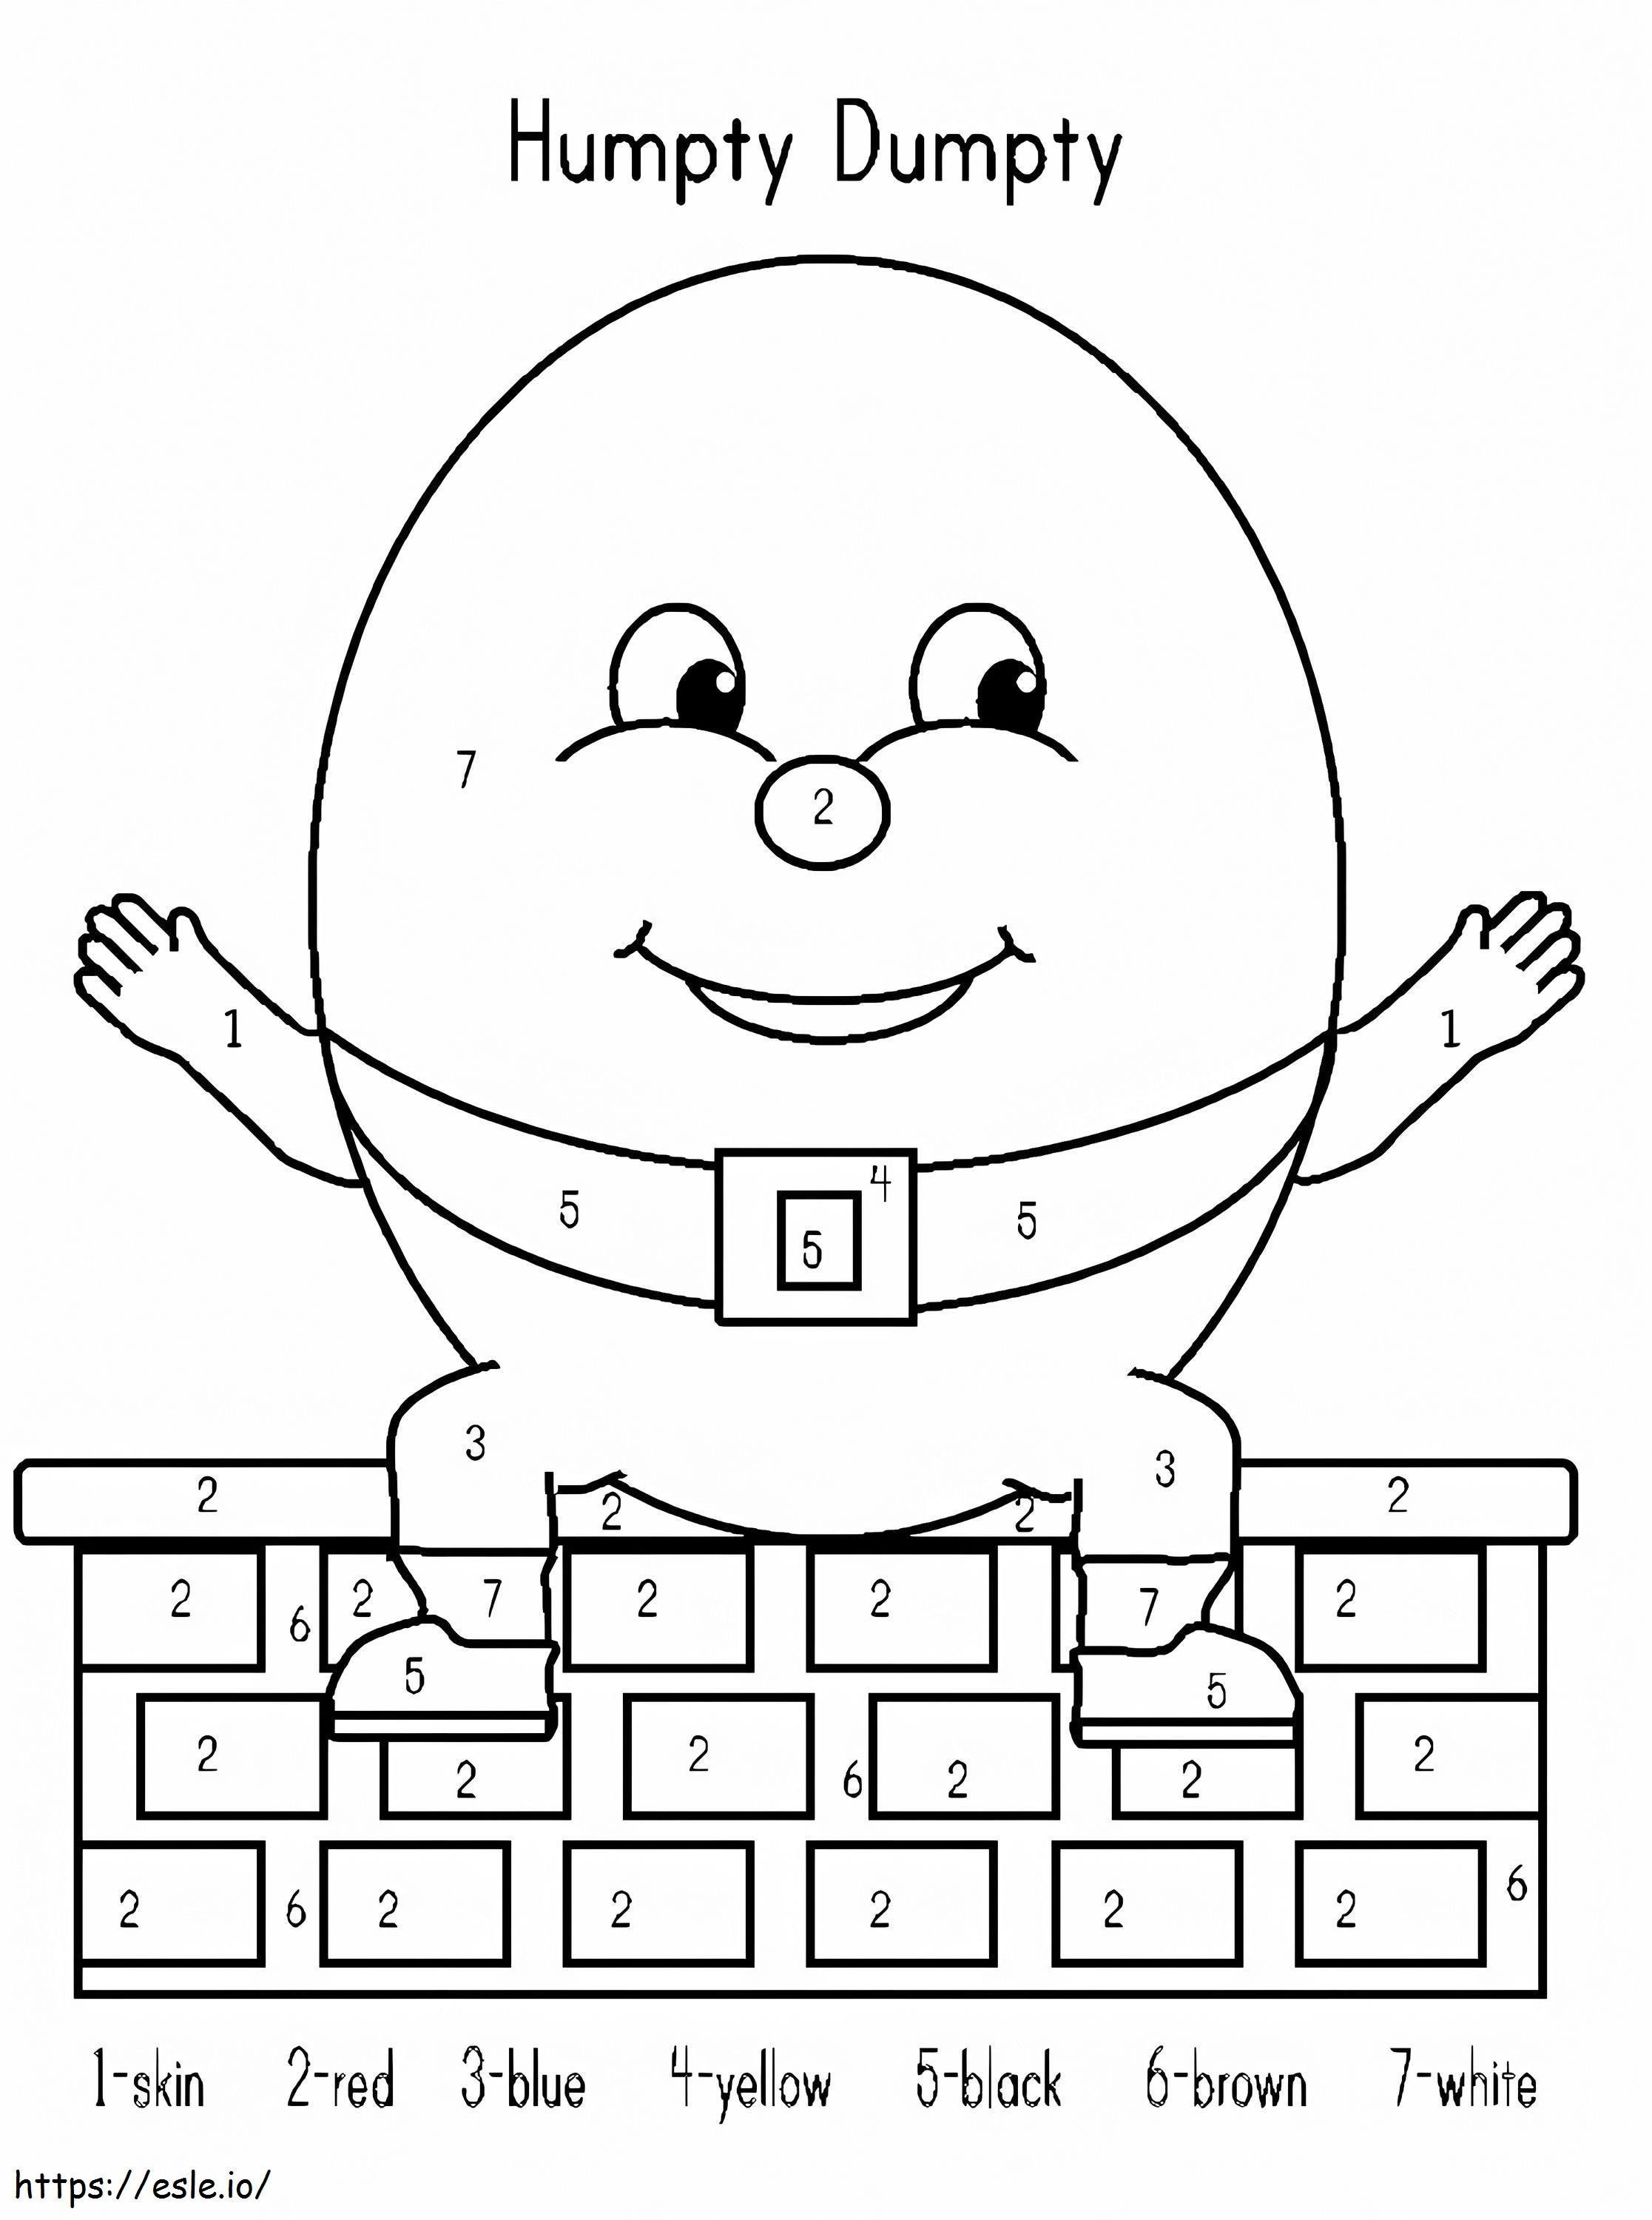 Humpty Dumpty Color coloring page